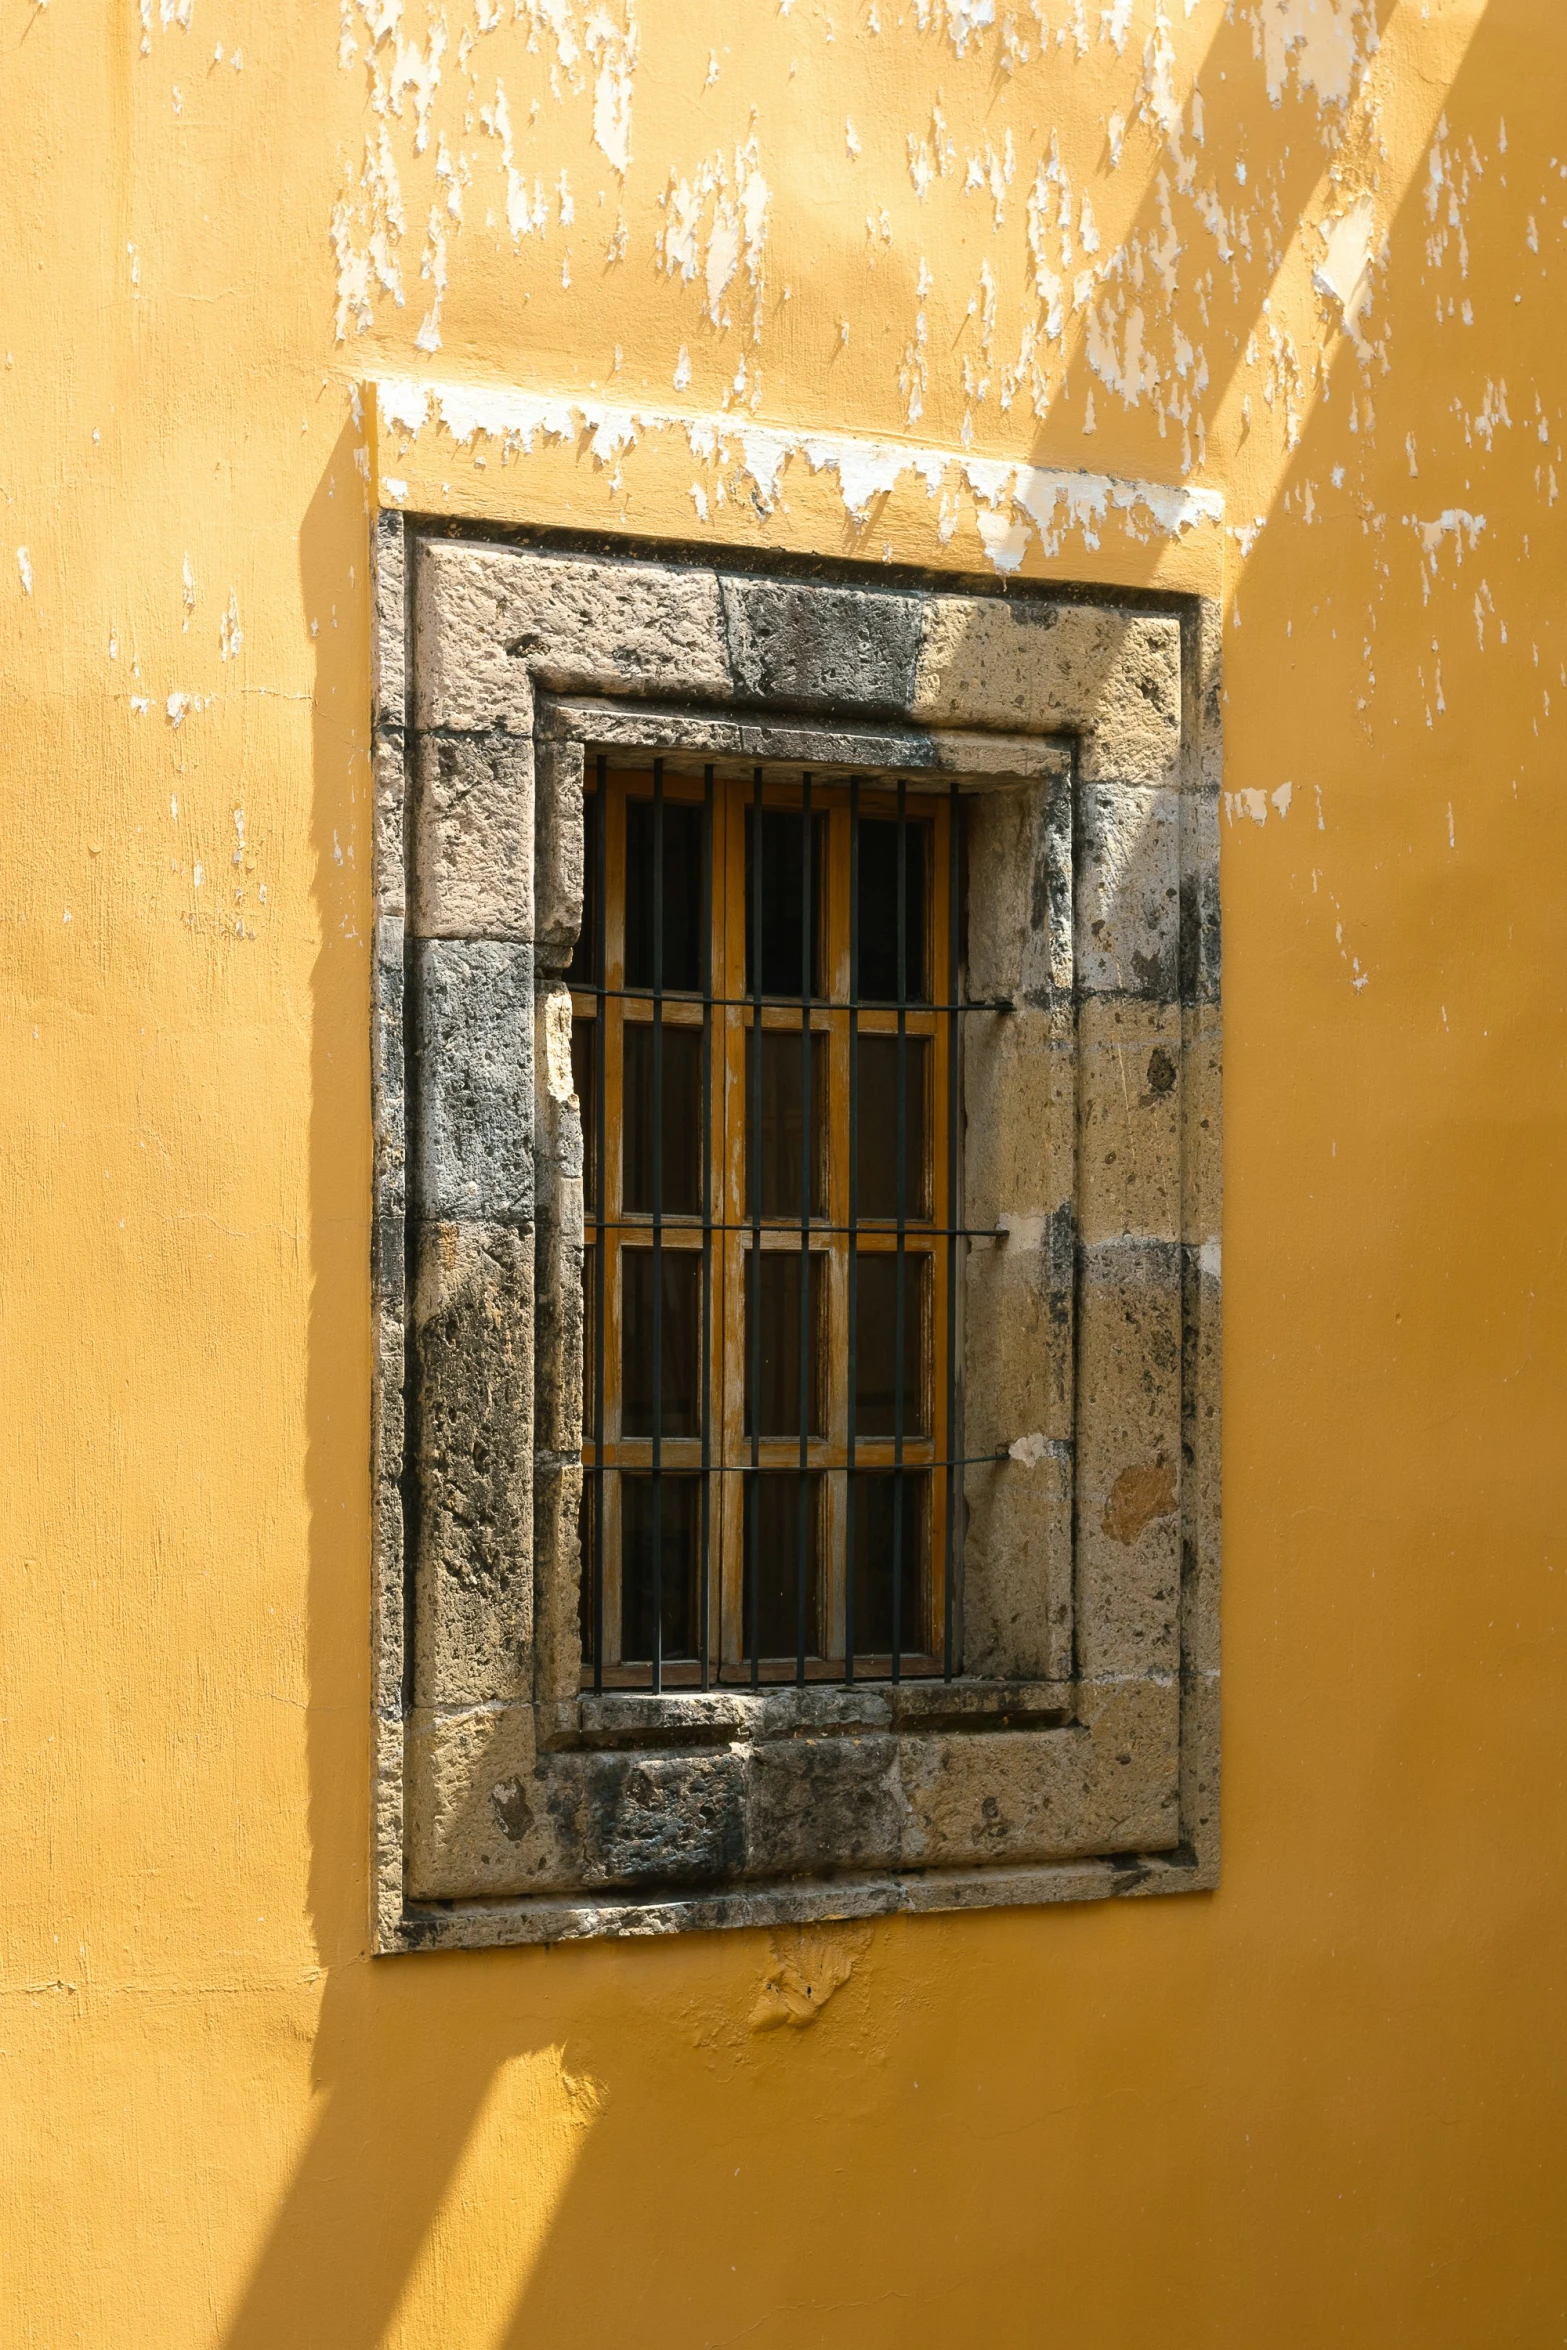 a window on the side of a building with bars